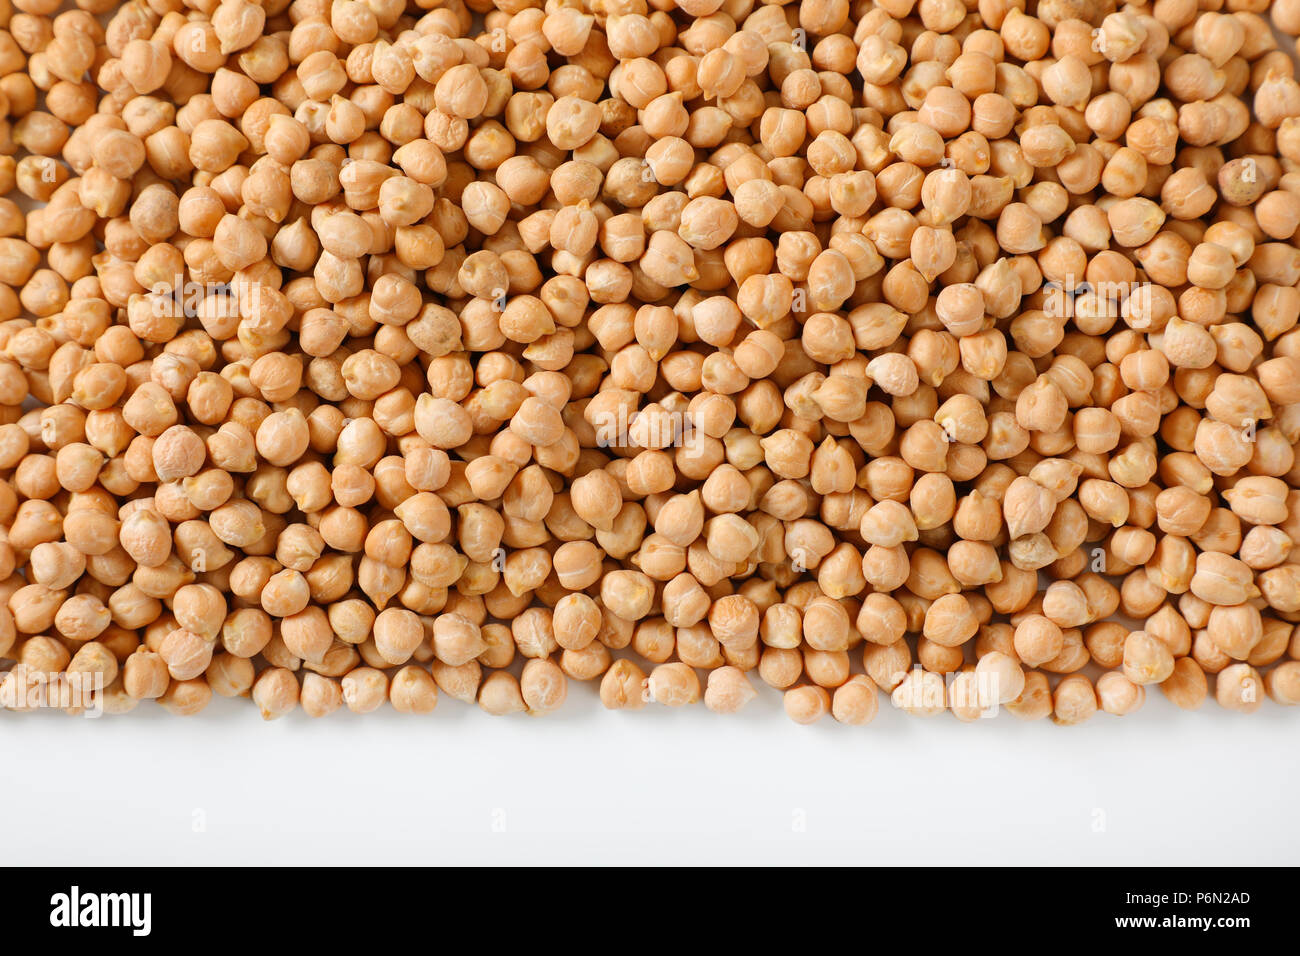 grains of raw chickpeas on white background Stock Photo